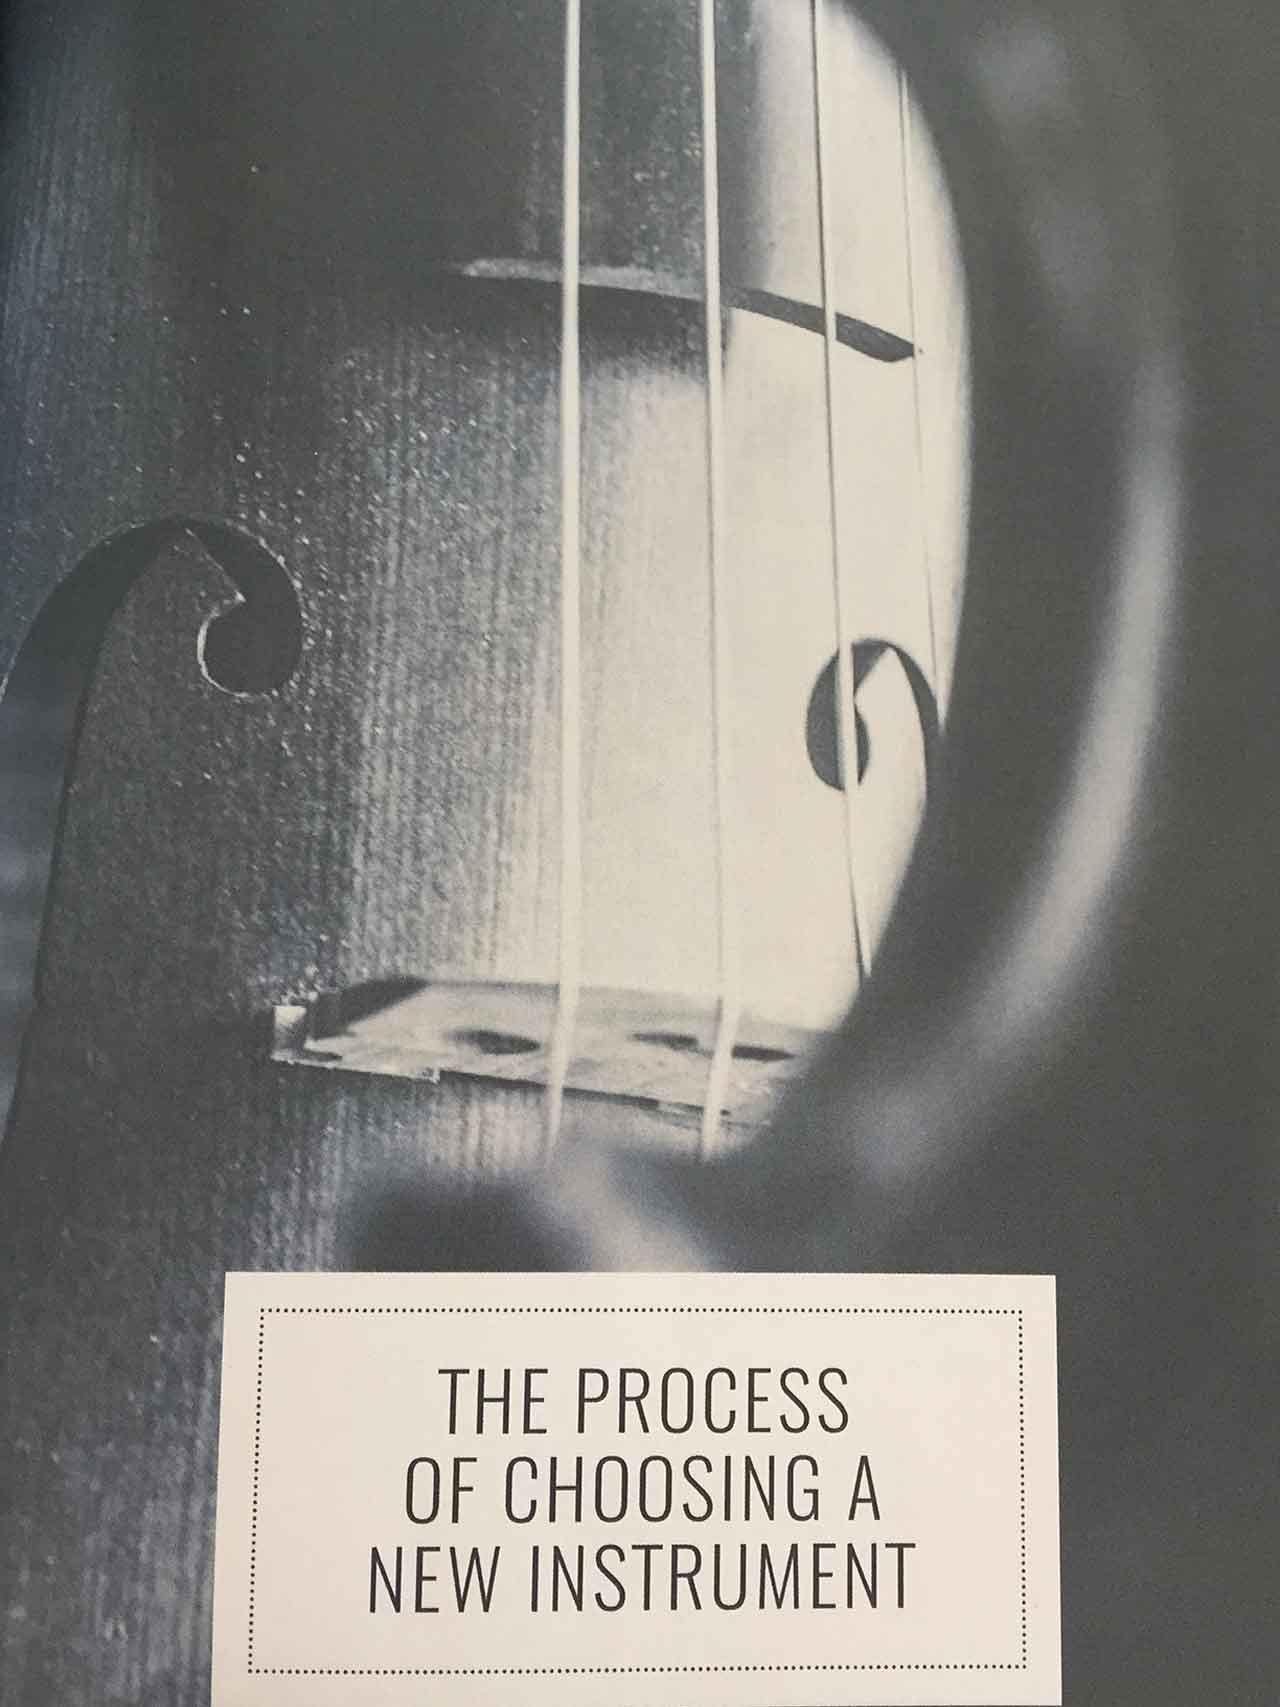 The Essential Handbook For Violinists Violists and Fiddle Players